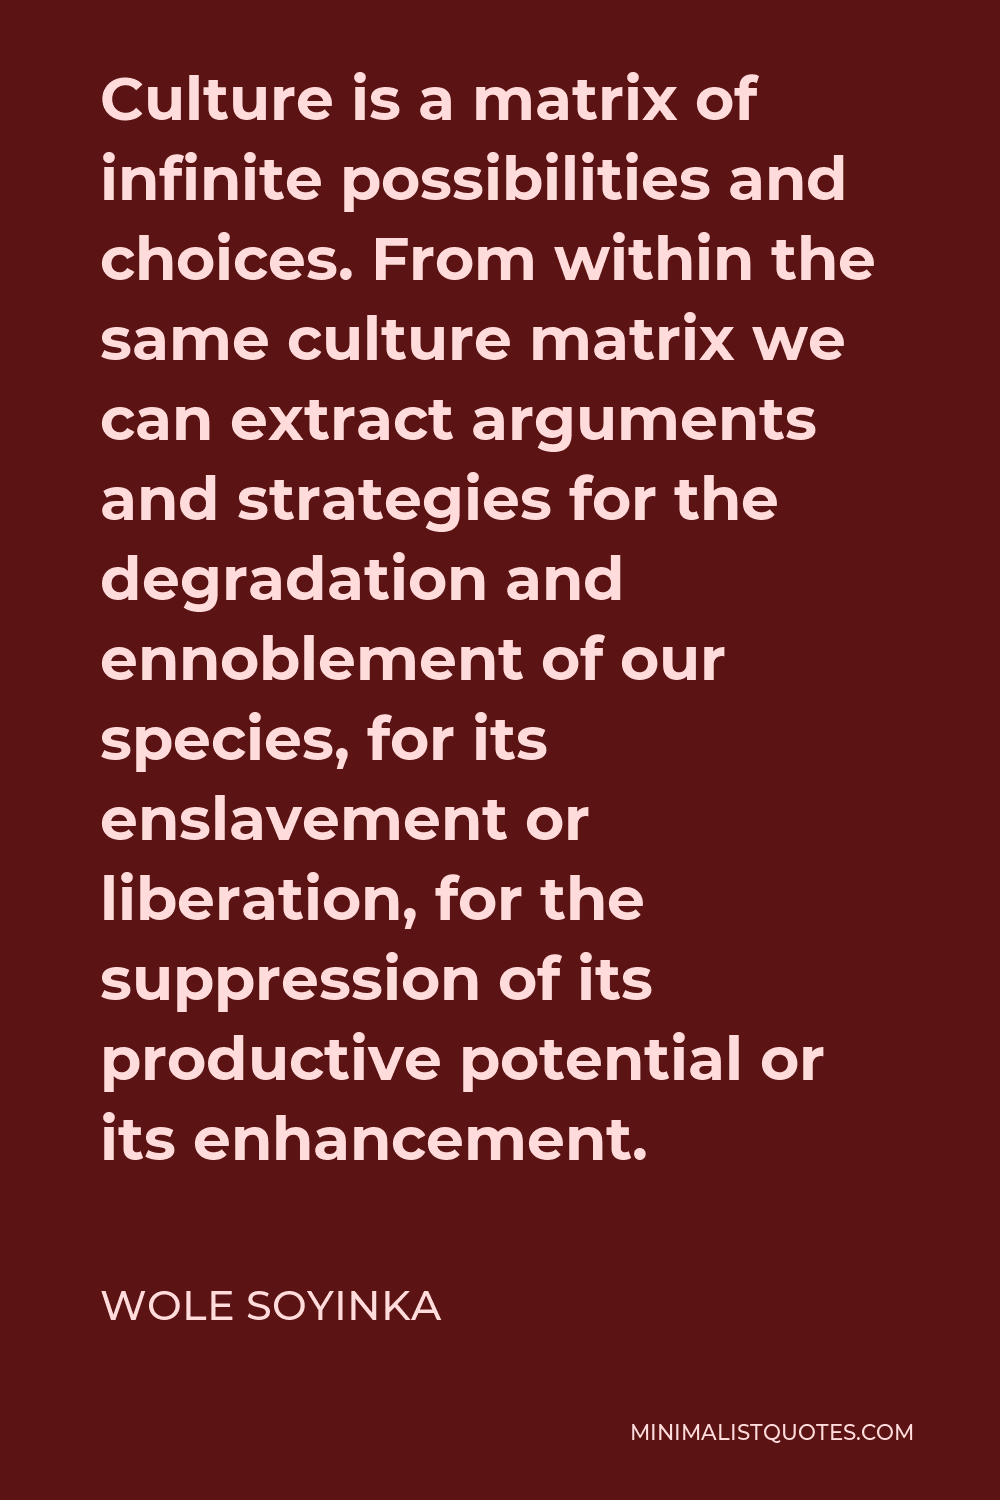 Wole Soyinka Quote - Culture is a matrix of infinite possibilities and choices. From within the same culture matrix we can extract arguments and strategies for the degradation and ennoblement of our species, for its enslavement or liberation, for the suppression of its productive potential or its enhancement.